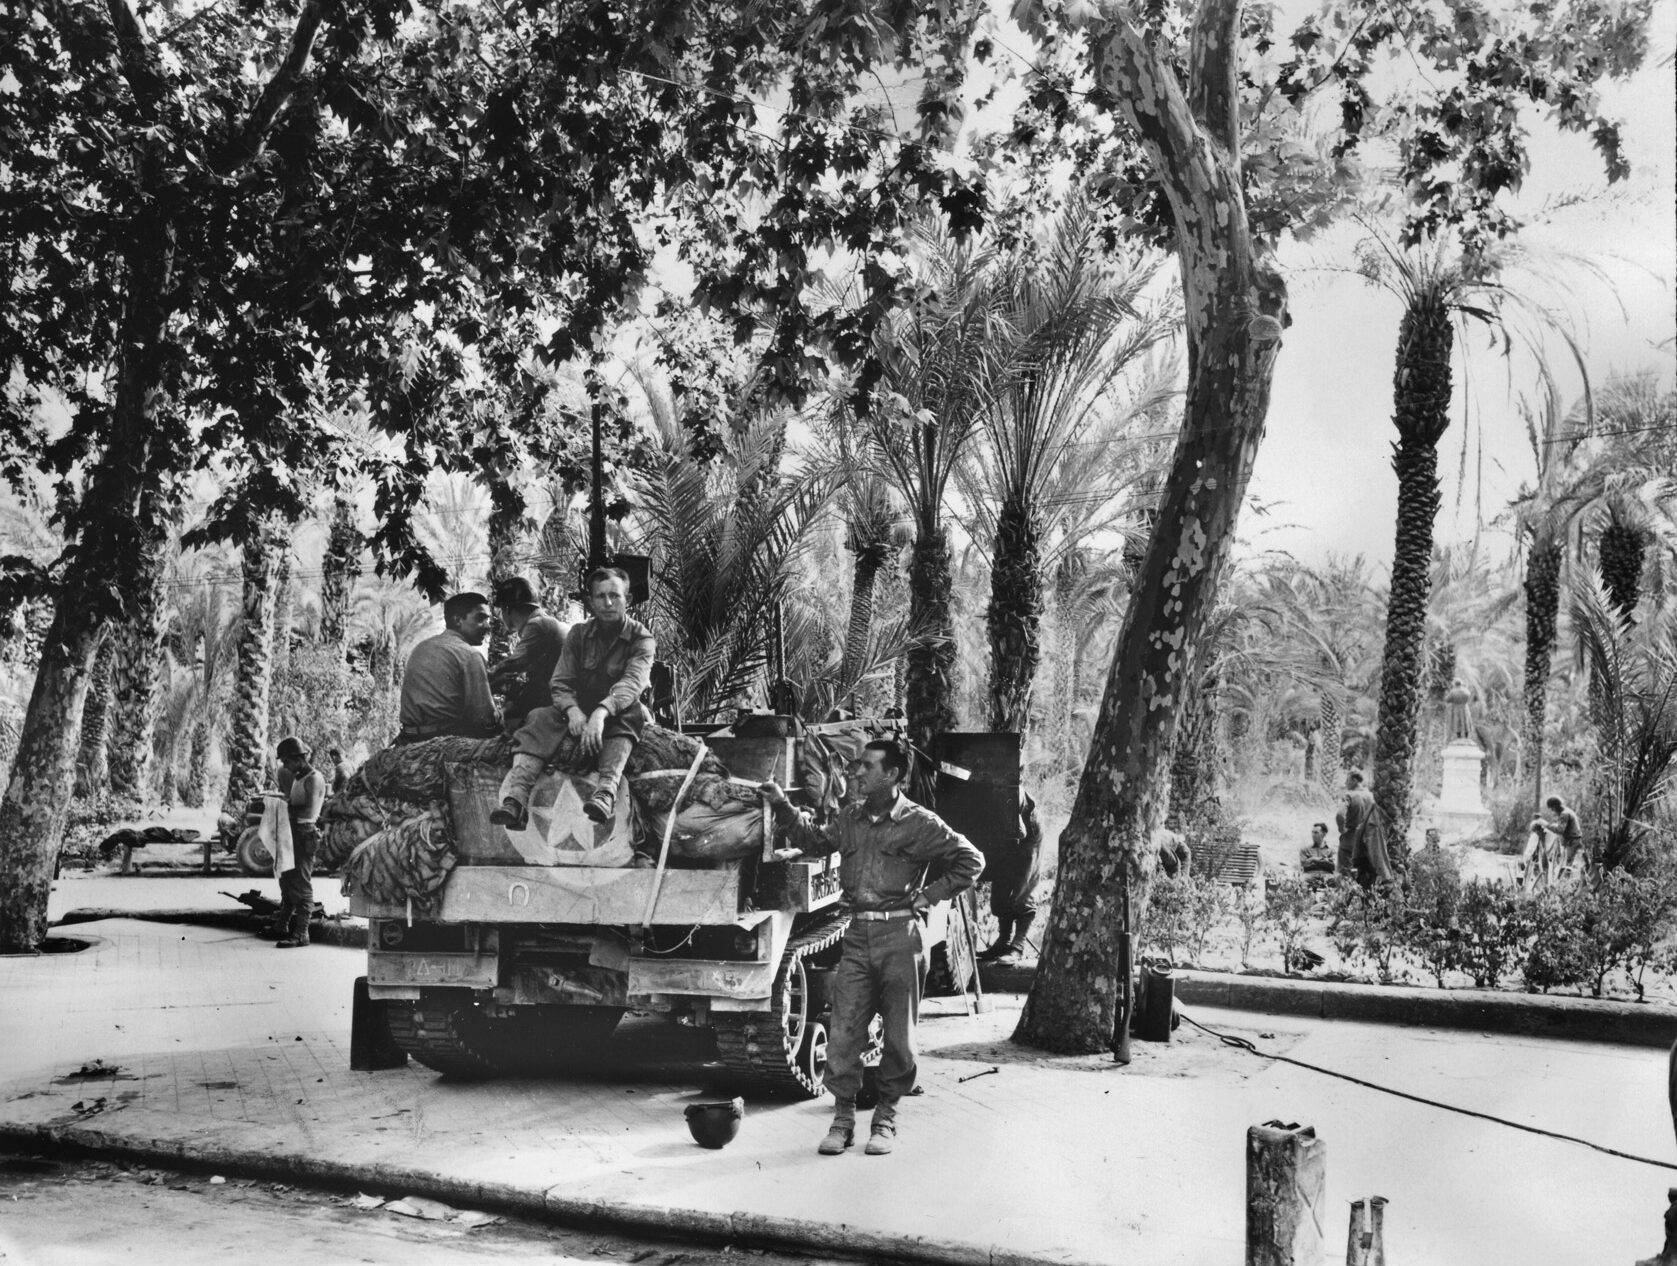 Armored Infantrymen from the 2nd Armored Division take a break in their half-track under the shade of some palm trees.